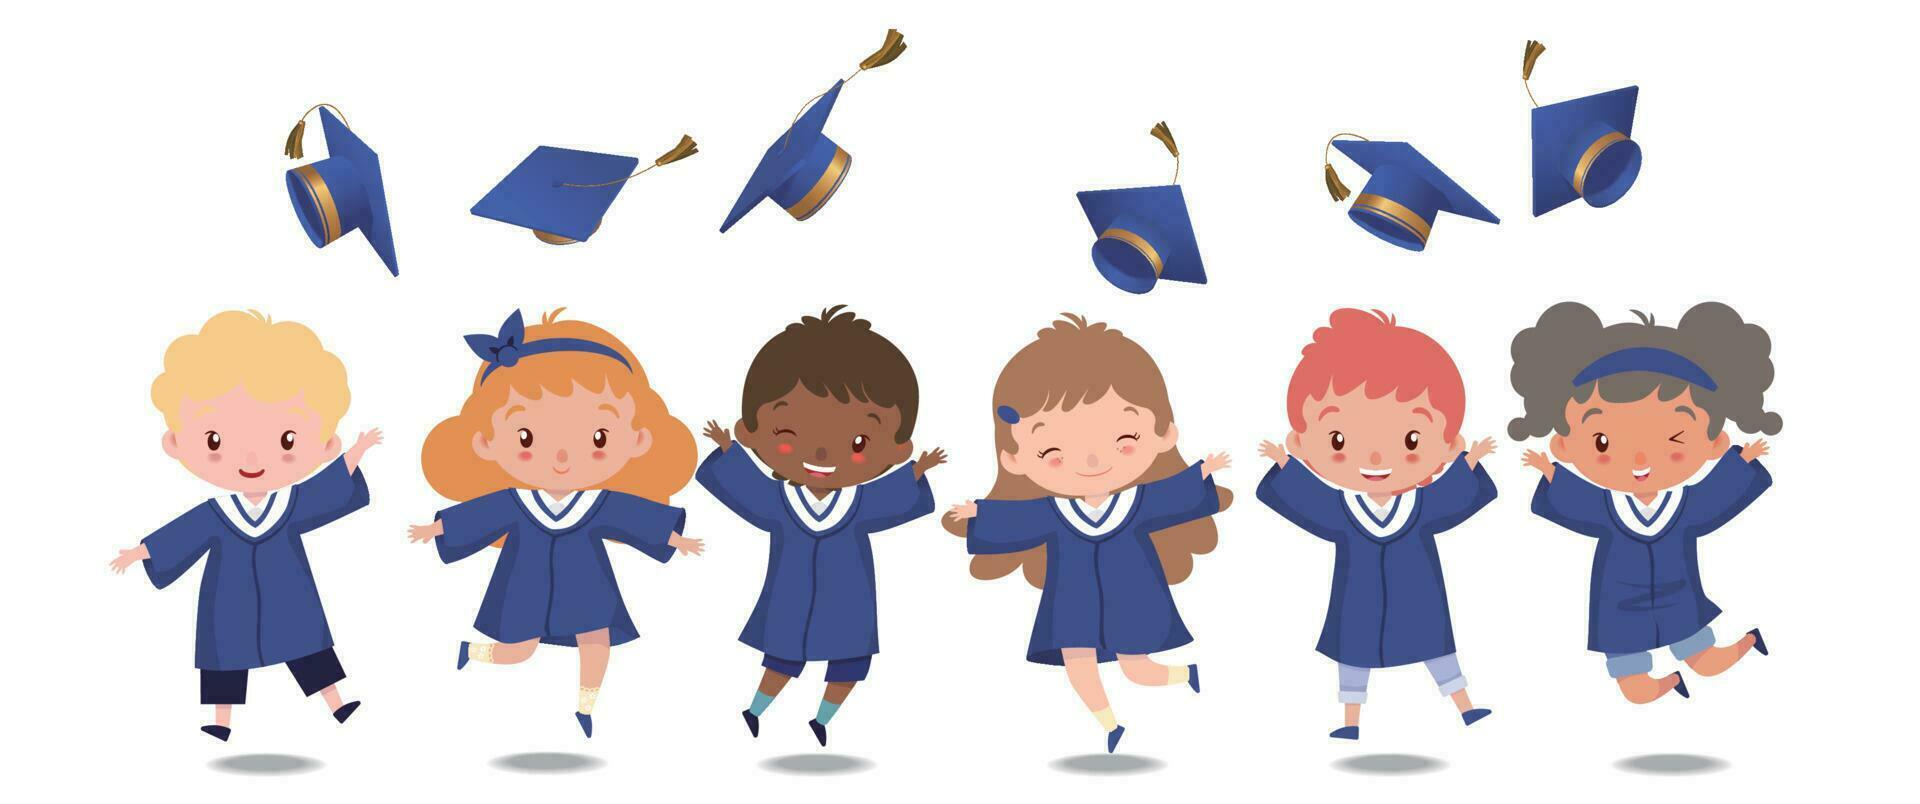 Group of kids in graduation suits jumping and throwing graduation caps on white background vector